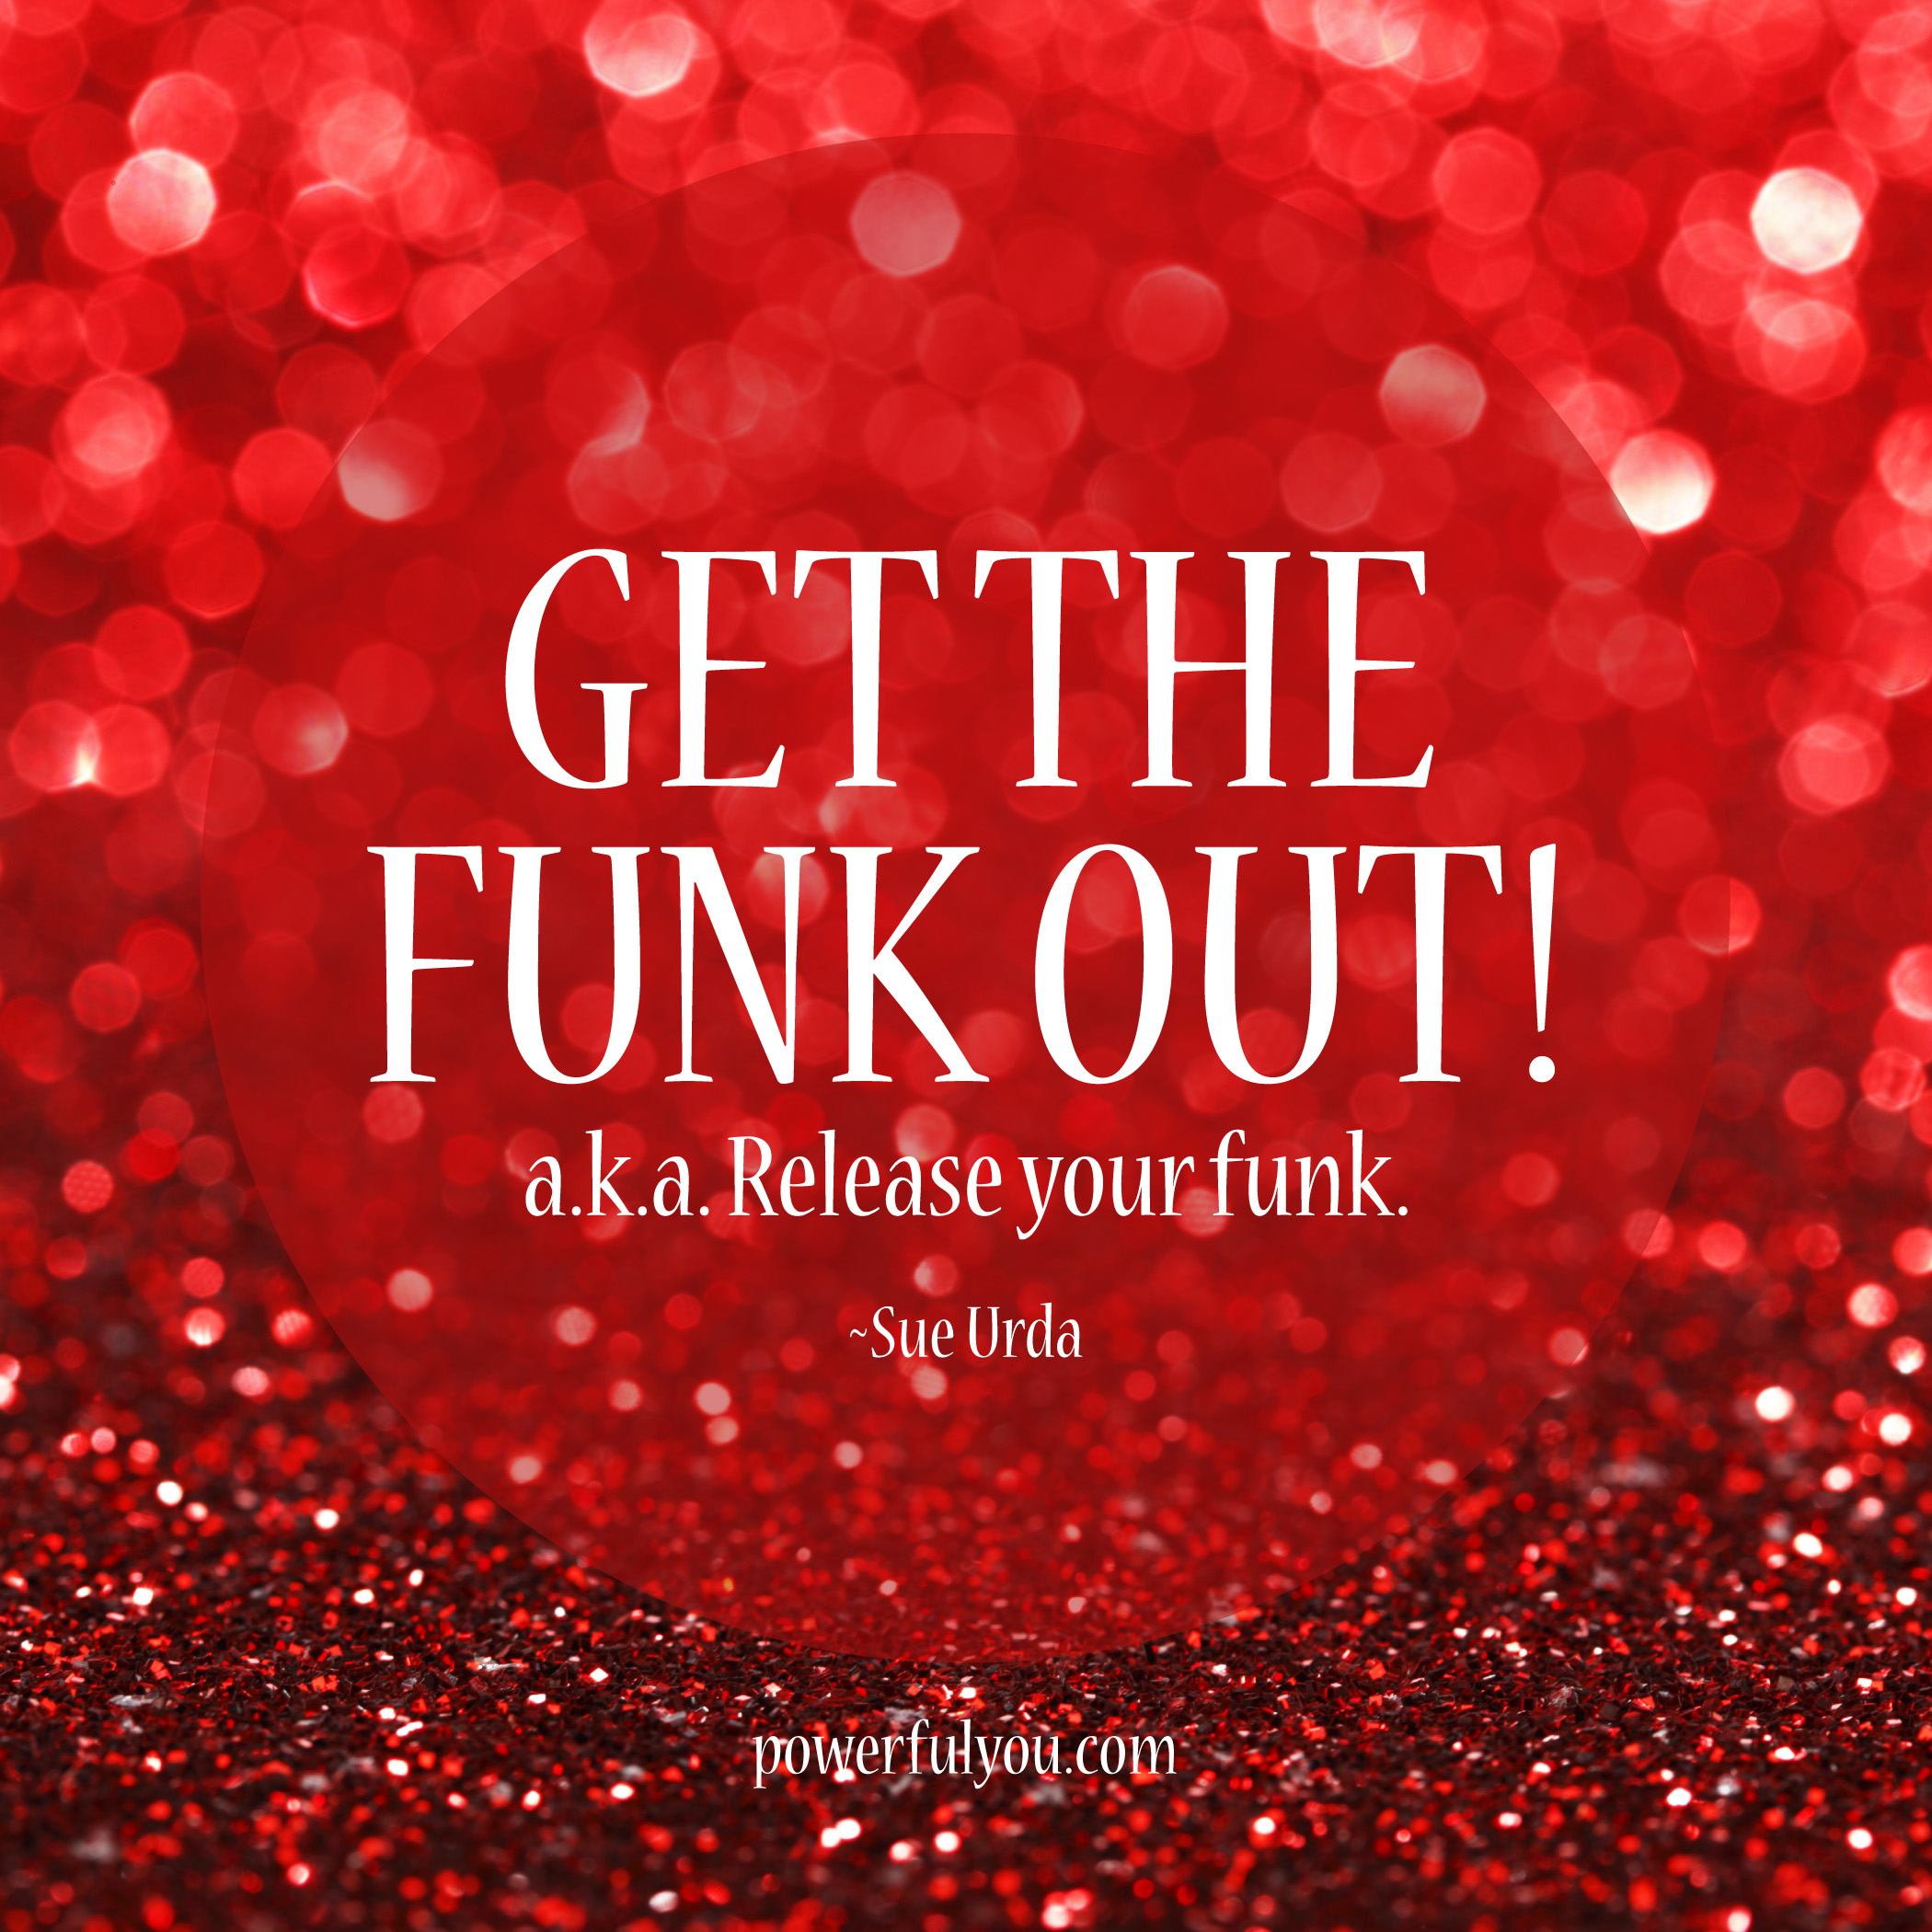 GET THE FUNK OUT!